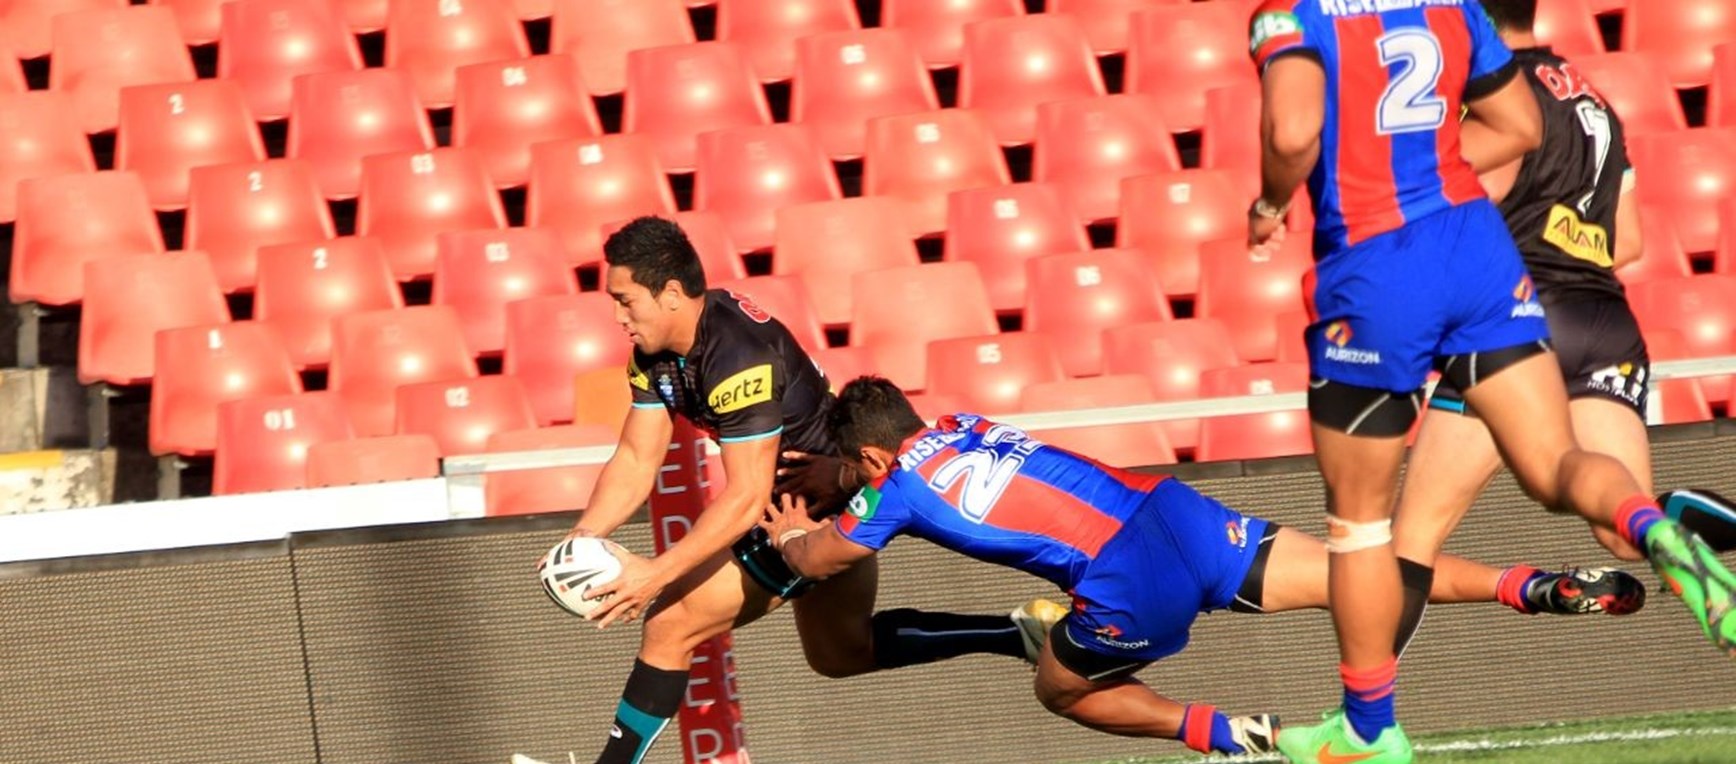 NSW Cup Photo Gallery